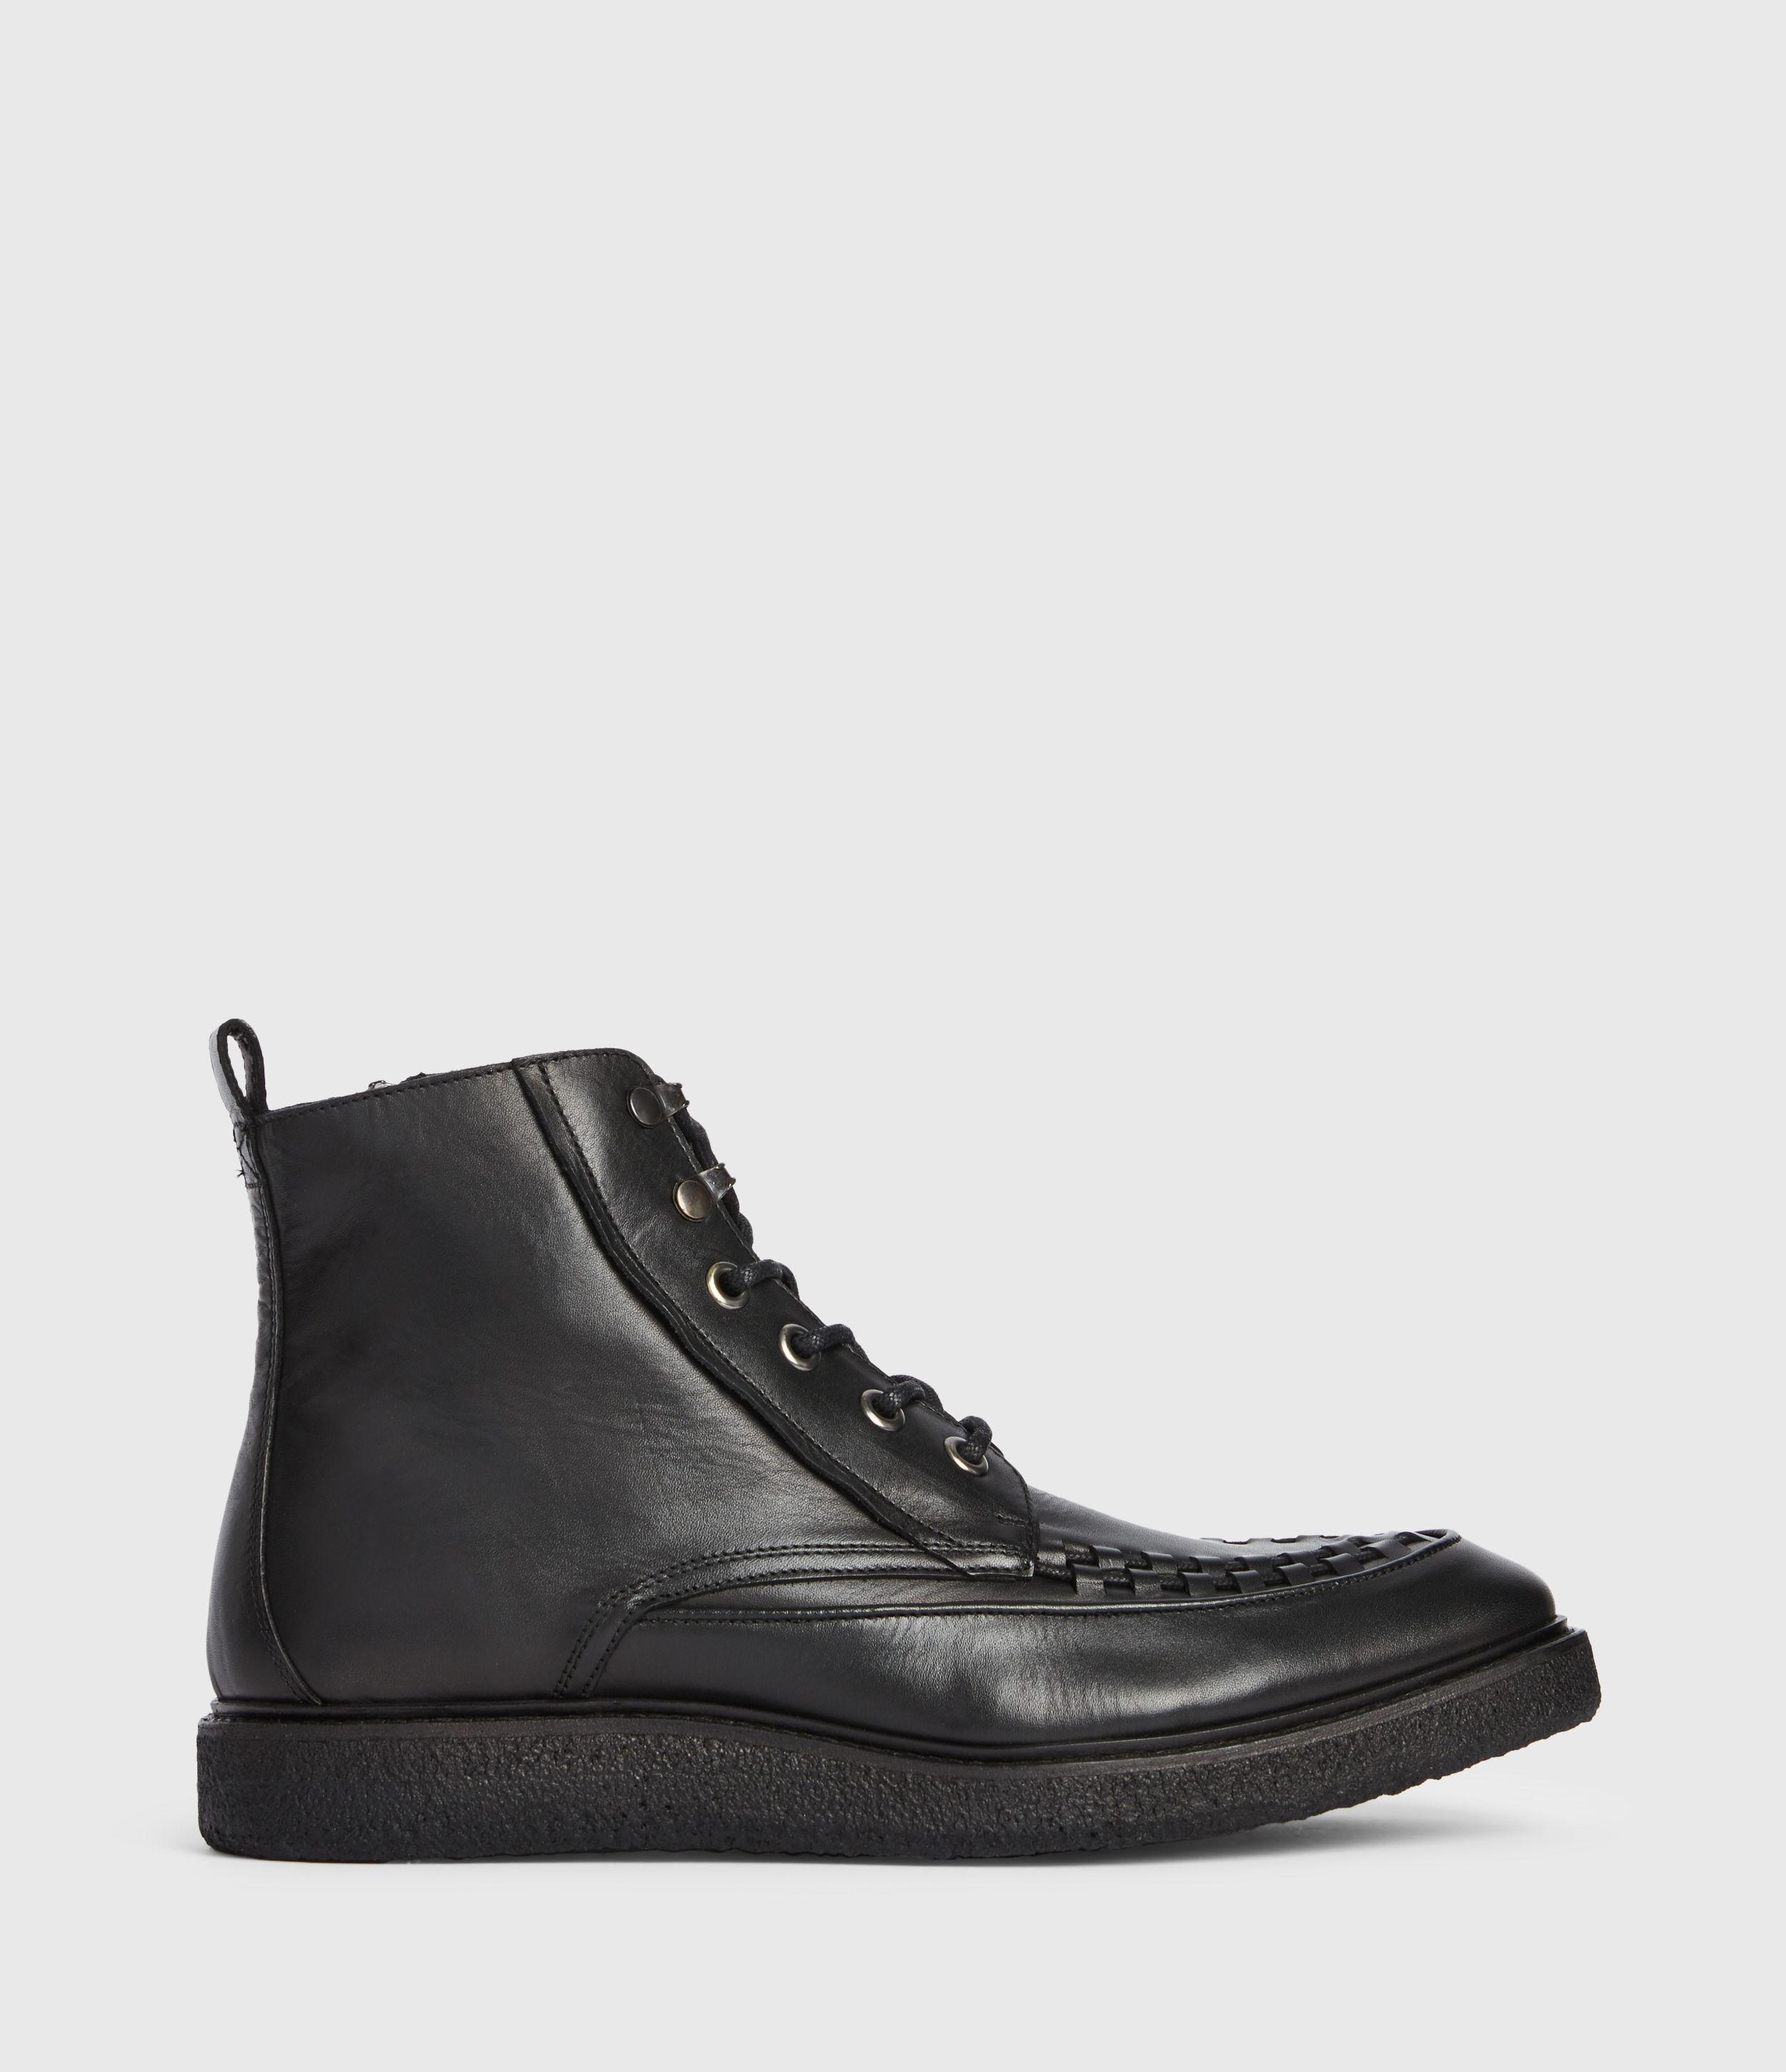 Arden Leather Boots in Black for Men - Lyst